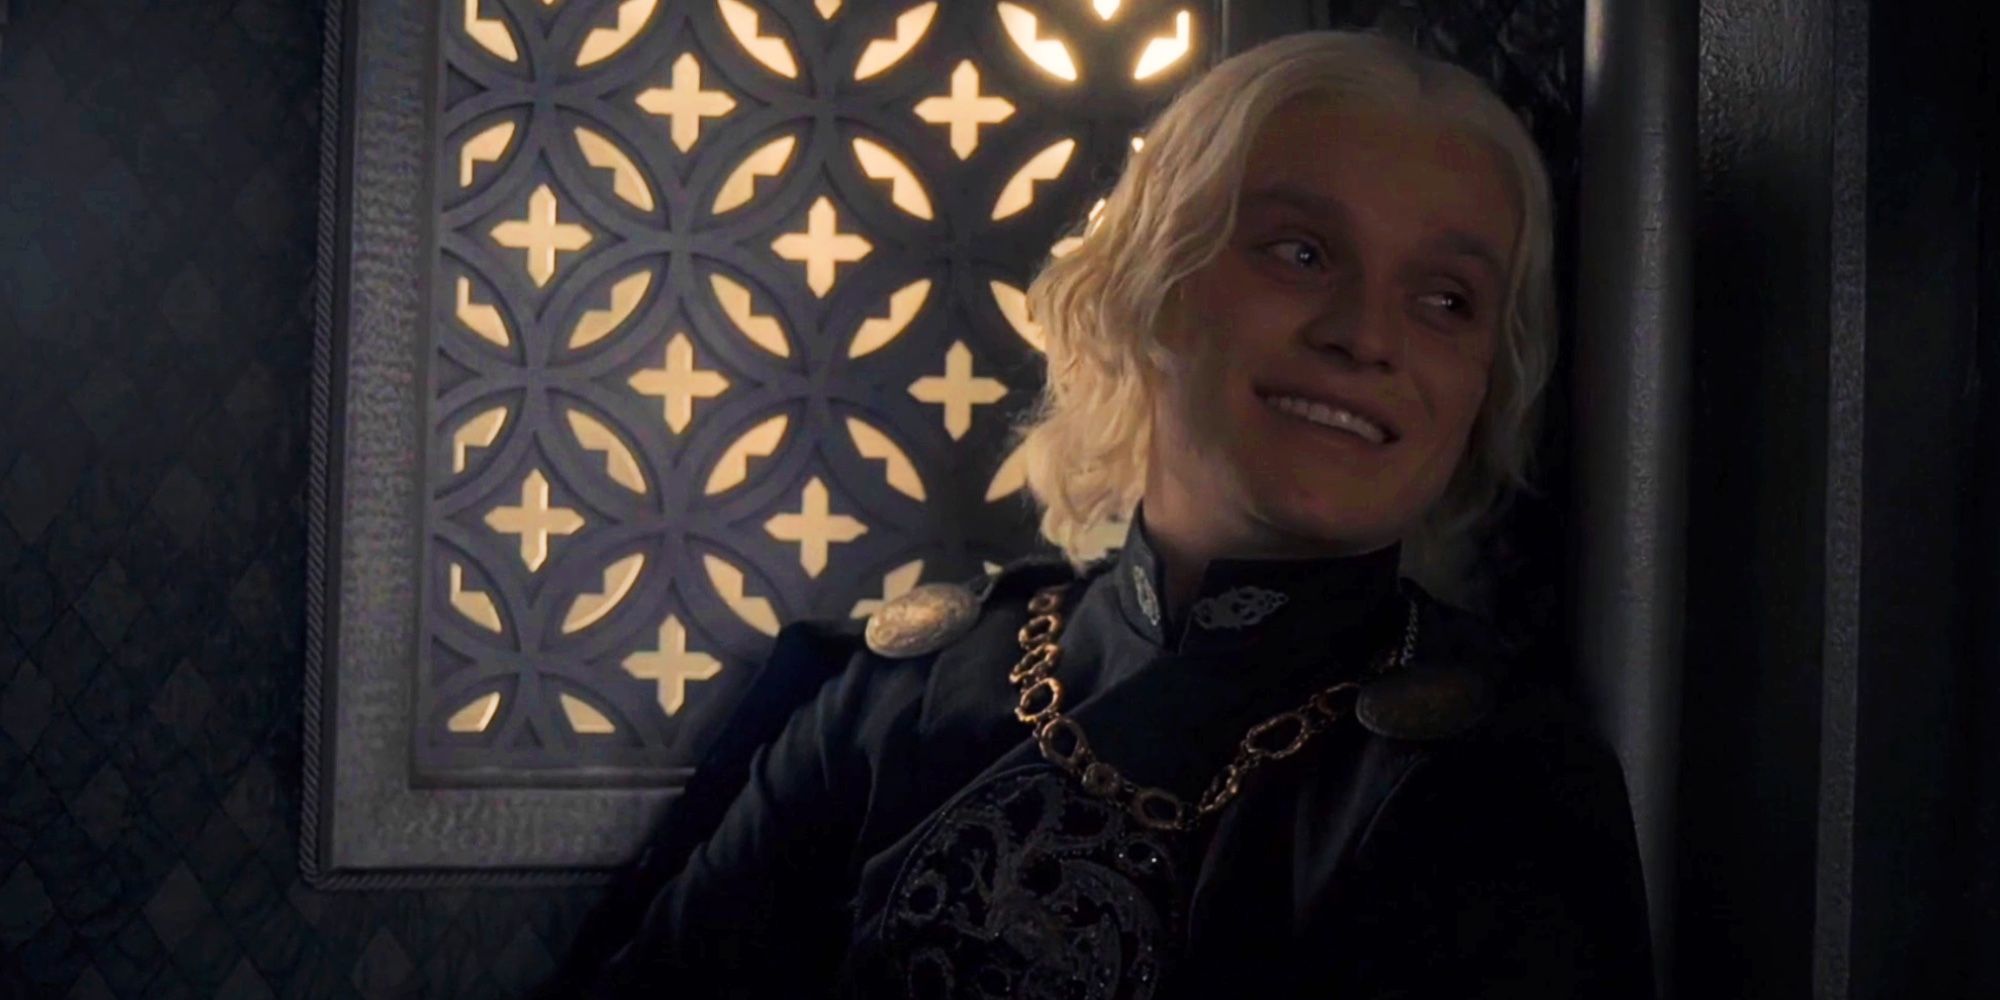 Aegon leaning back and smiling